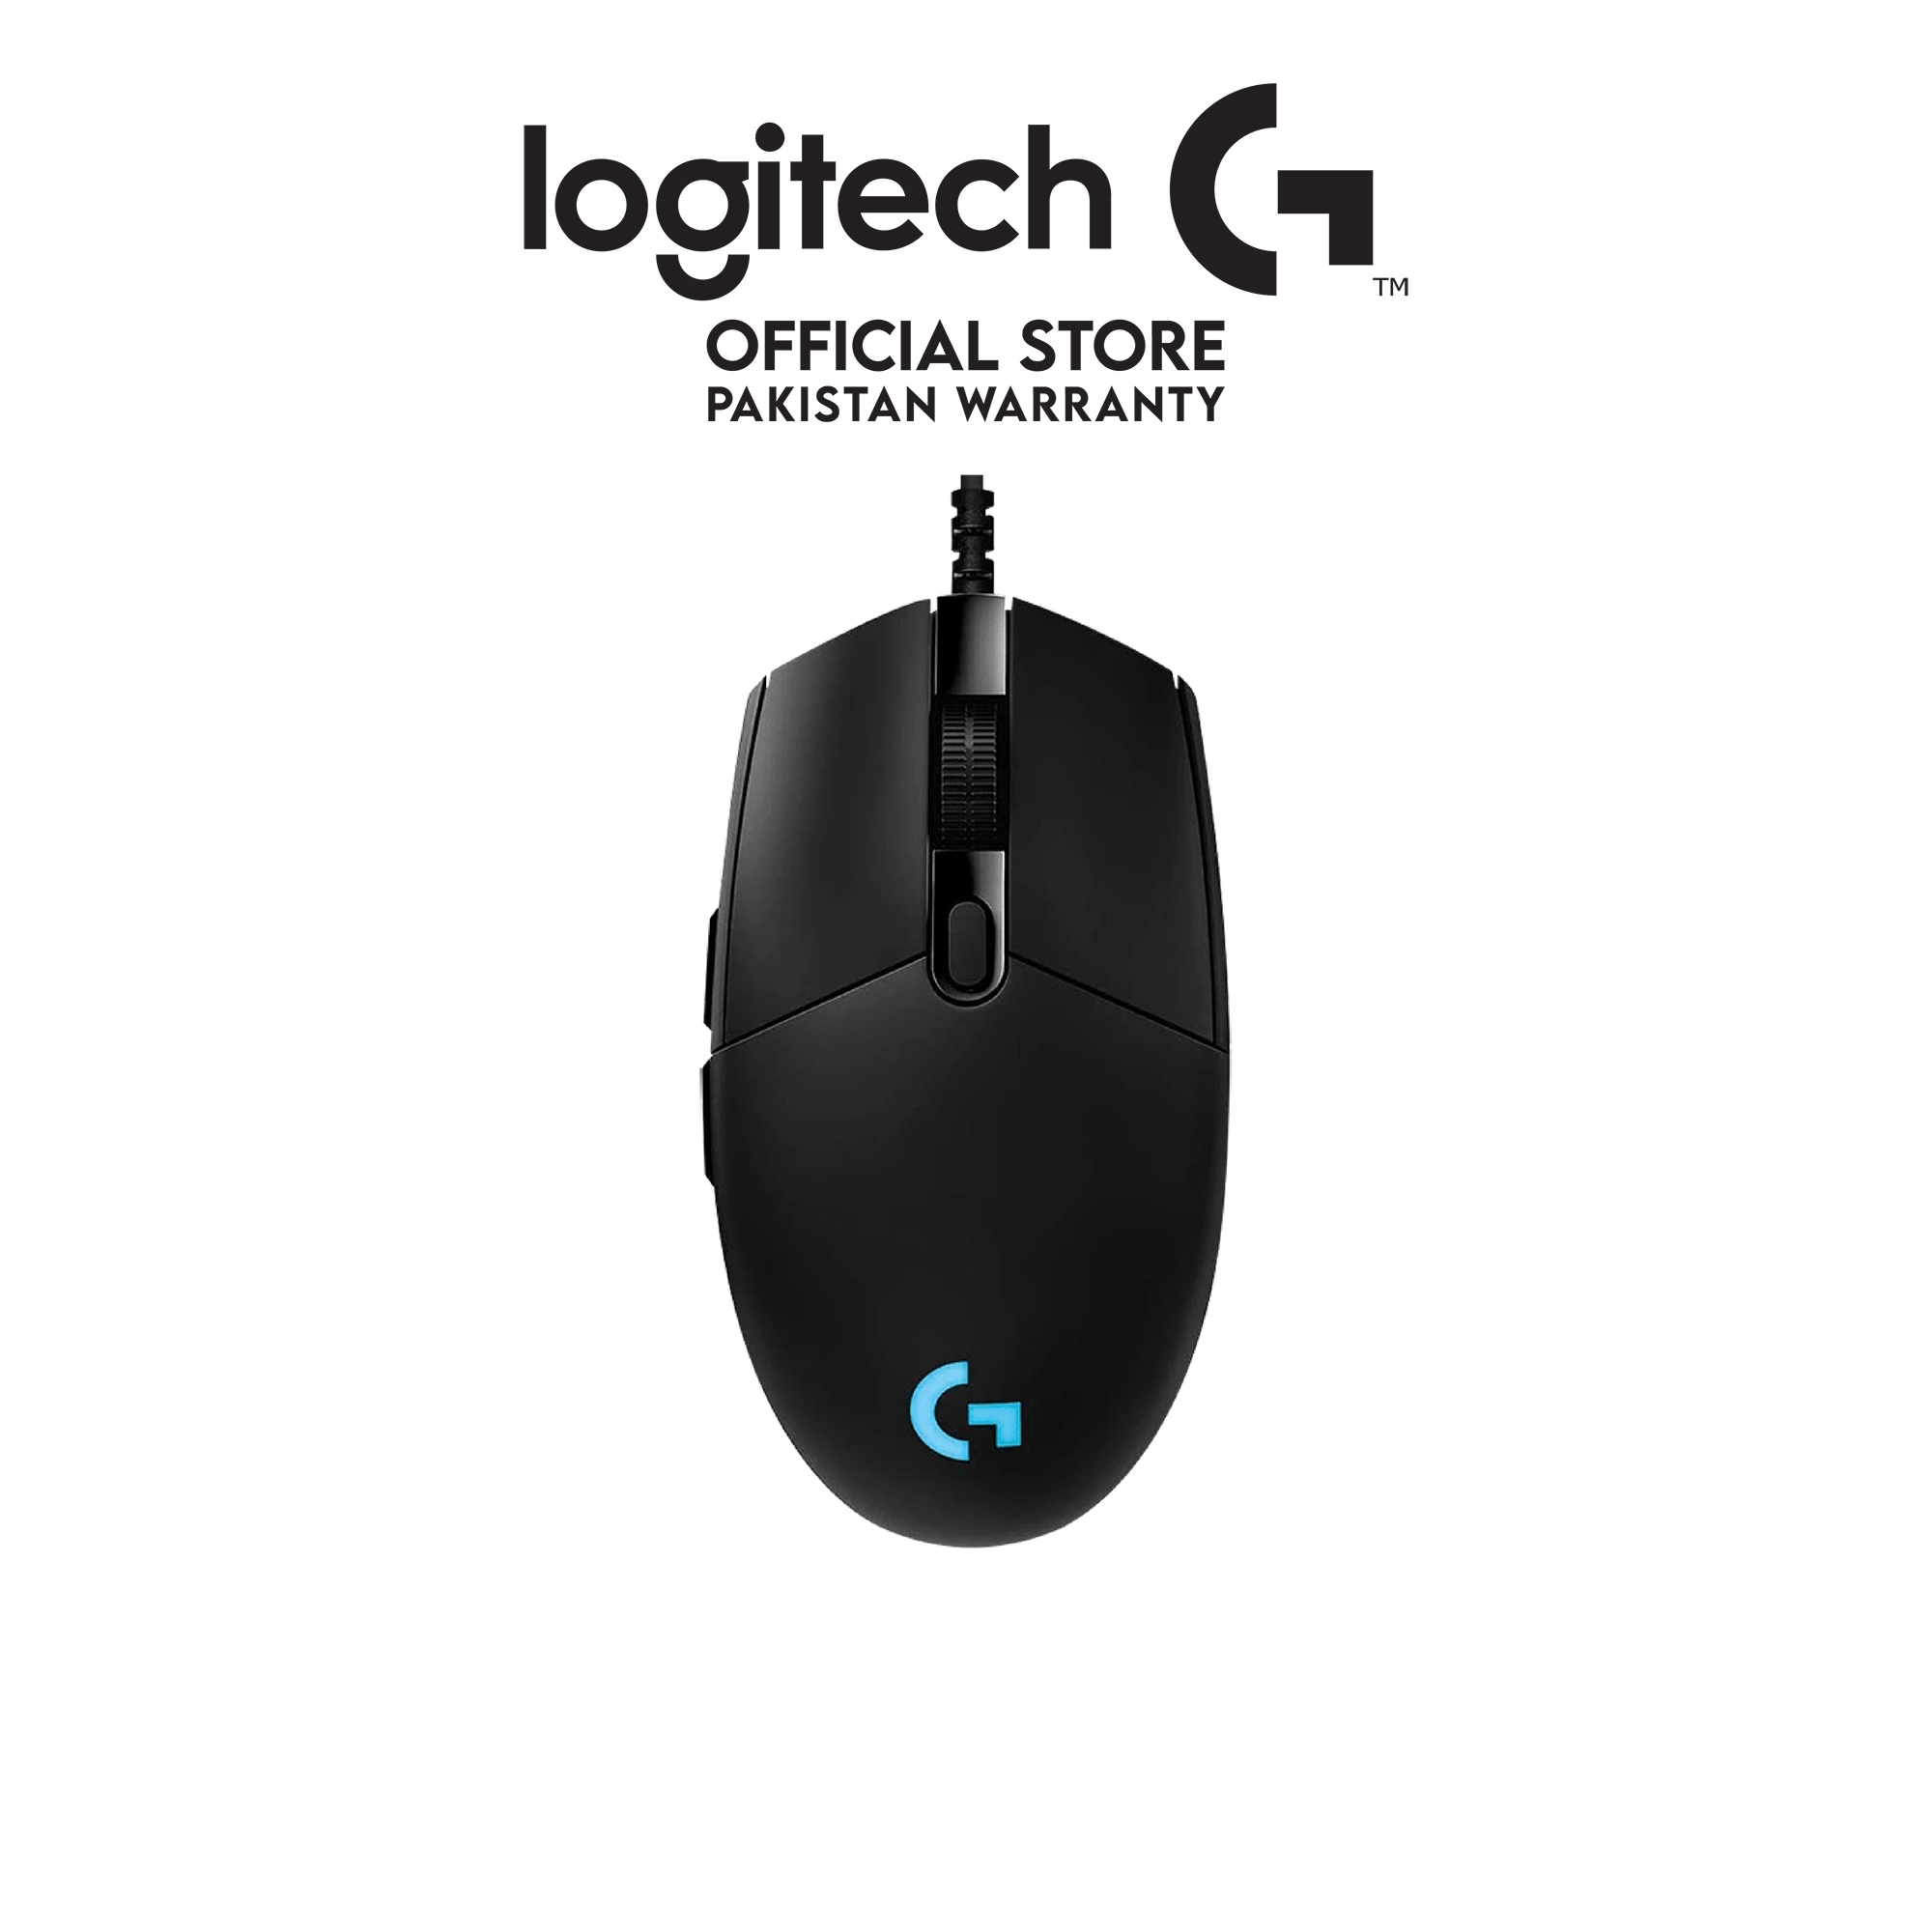 Logitech G PRO Wired Gaming Mouse, Hero 16K Sensor, 16000 DPI, RGB, Ultra  Lightweight, 6 Programmable Buttons, On-Board Memory, Built for Esport